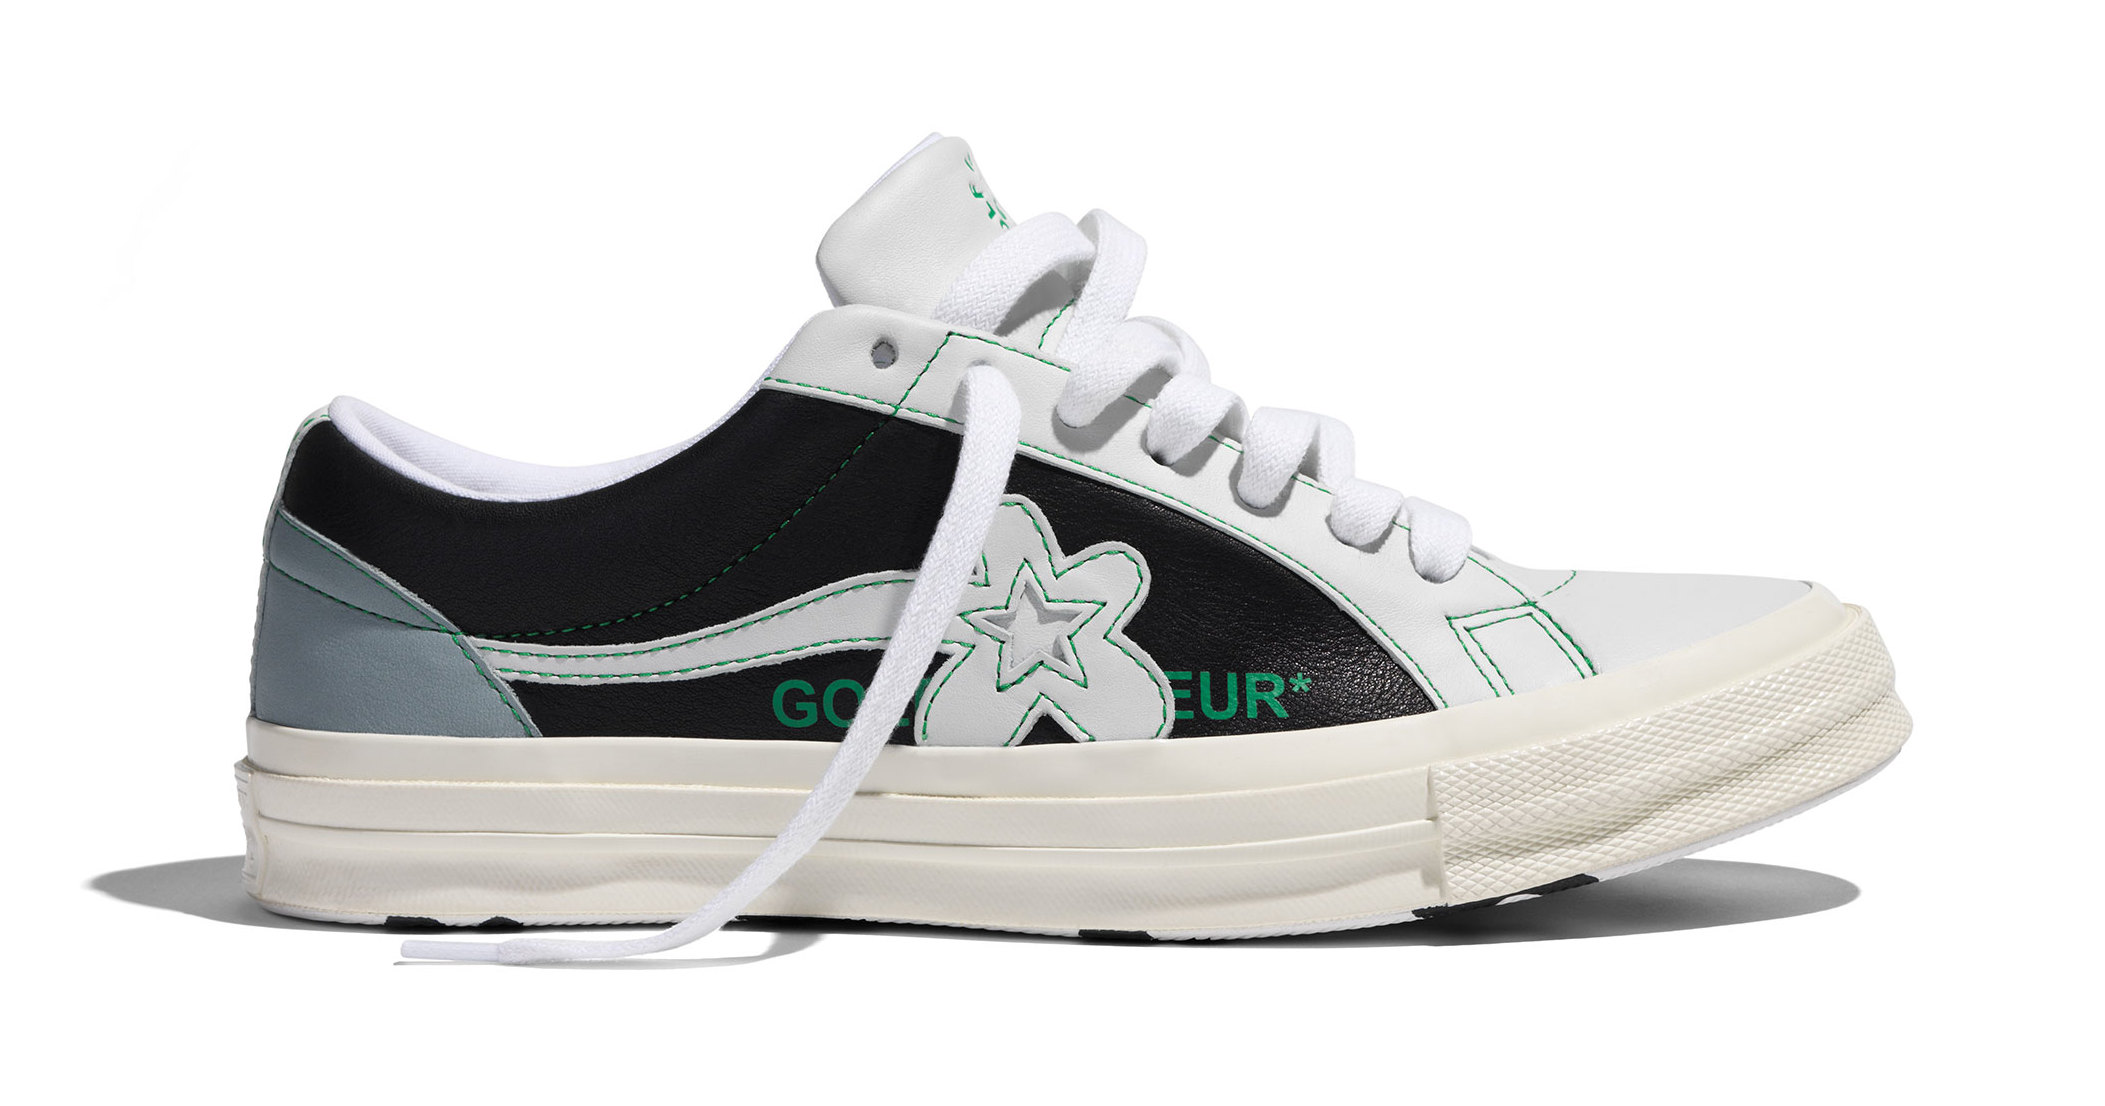 Tyler, the Creator x Converse Golf Le Fleur &#x27;Industrial Pack&#x27; 164023 (Lateral)